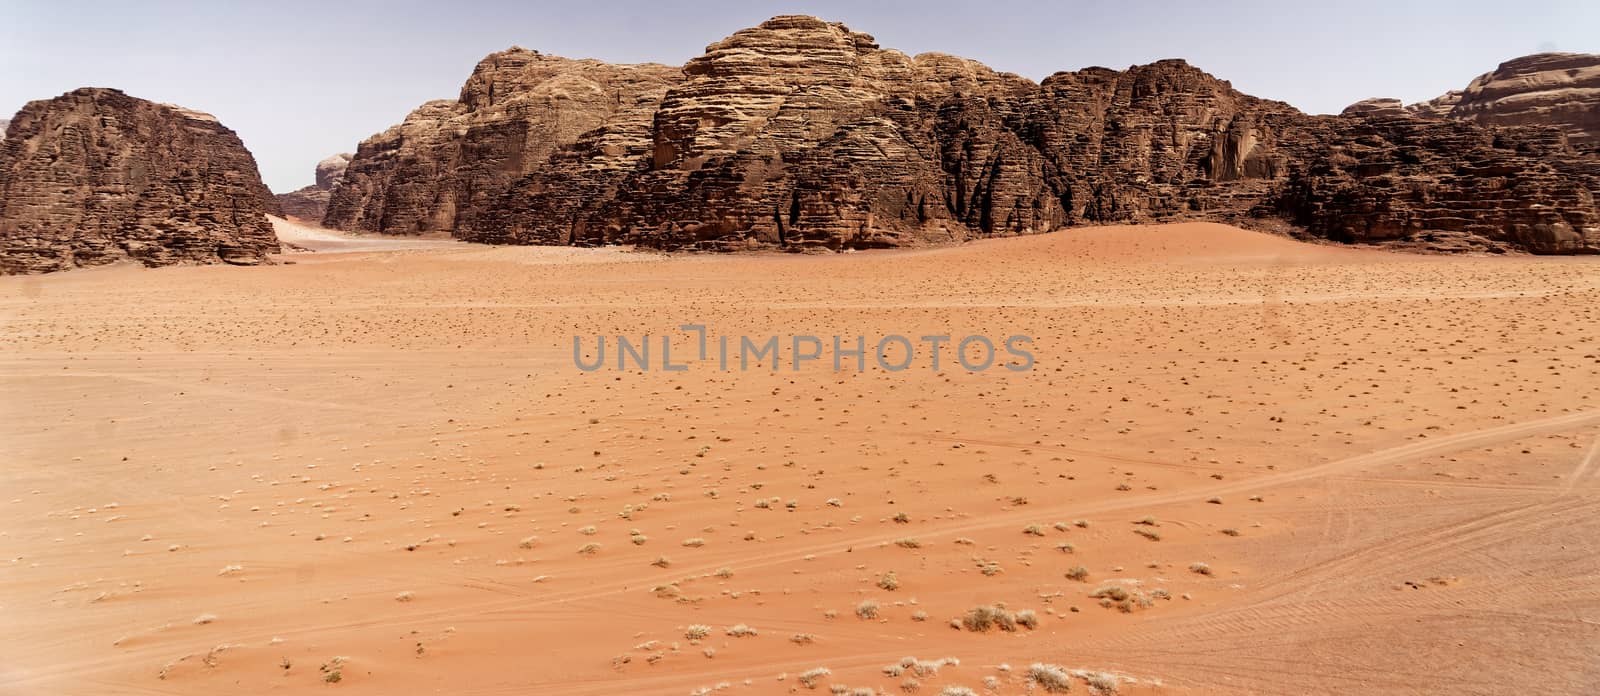 The emptiness of the great desert in the nature reserve of Wadi Rum, with large mountains of red sandstone in the background and the view over the wide sandy plain. by geogif